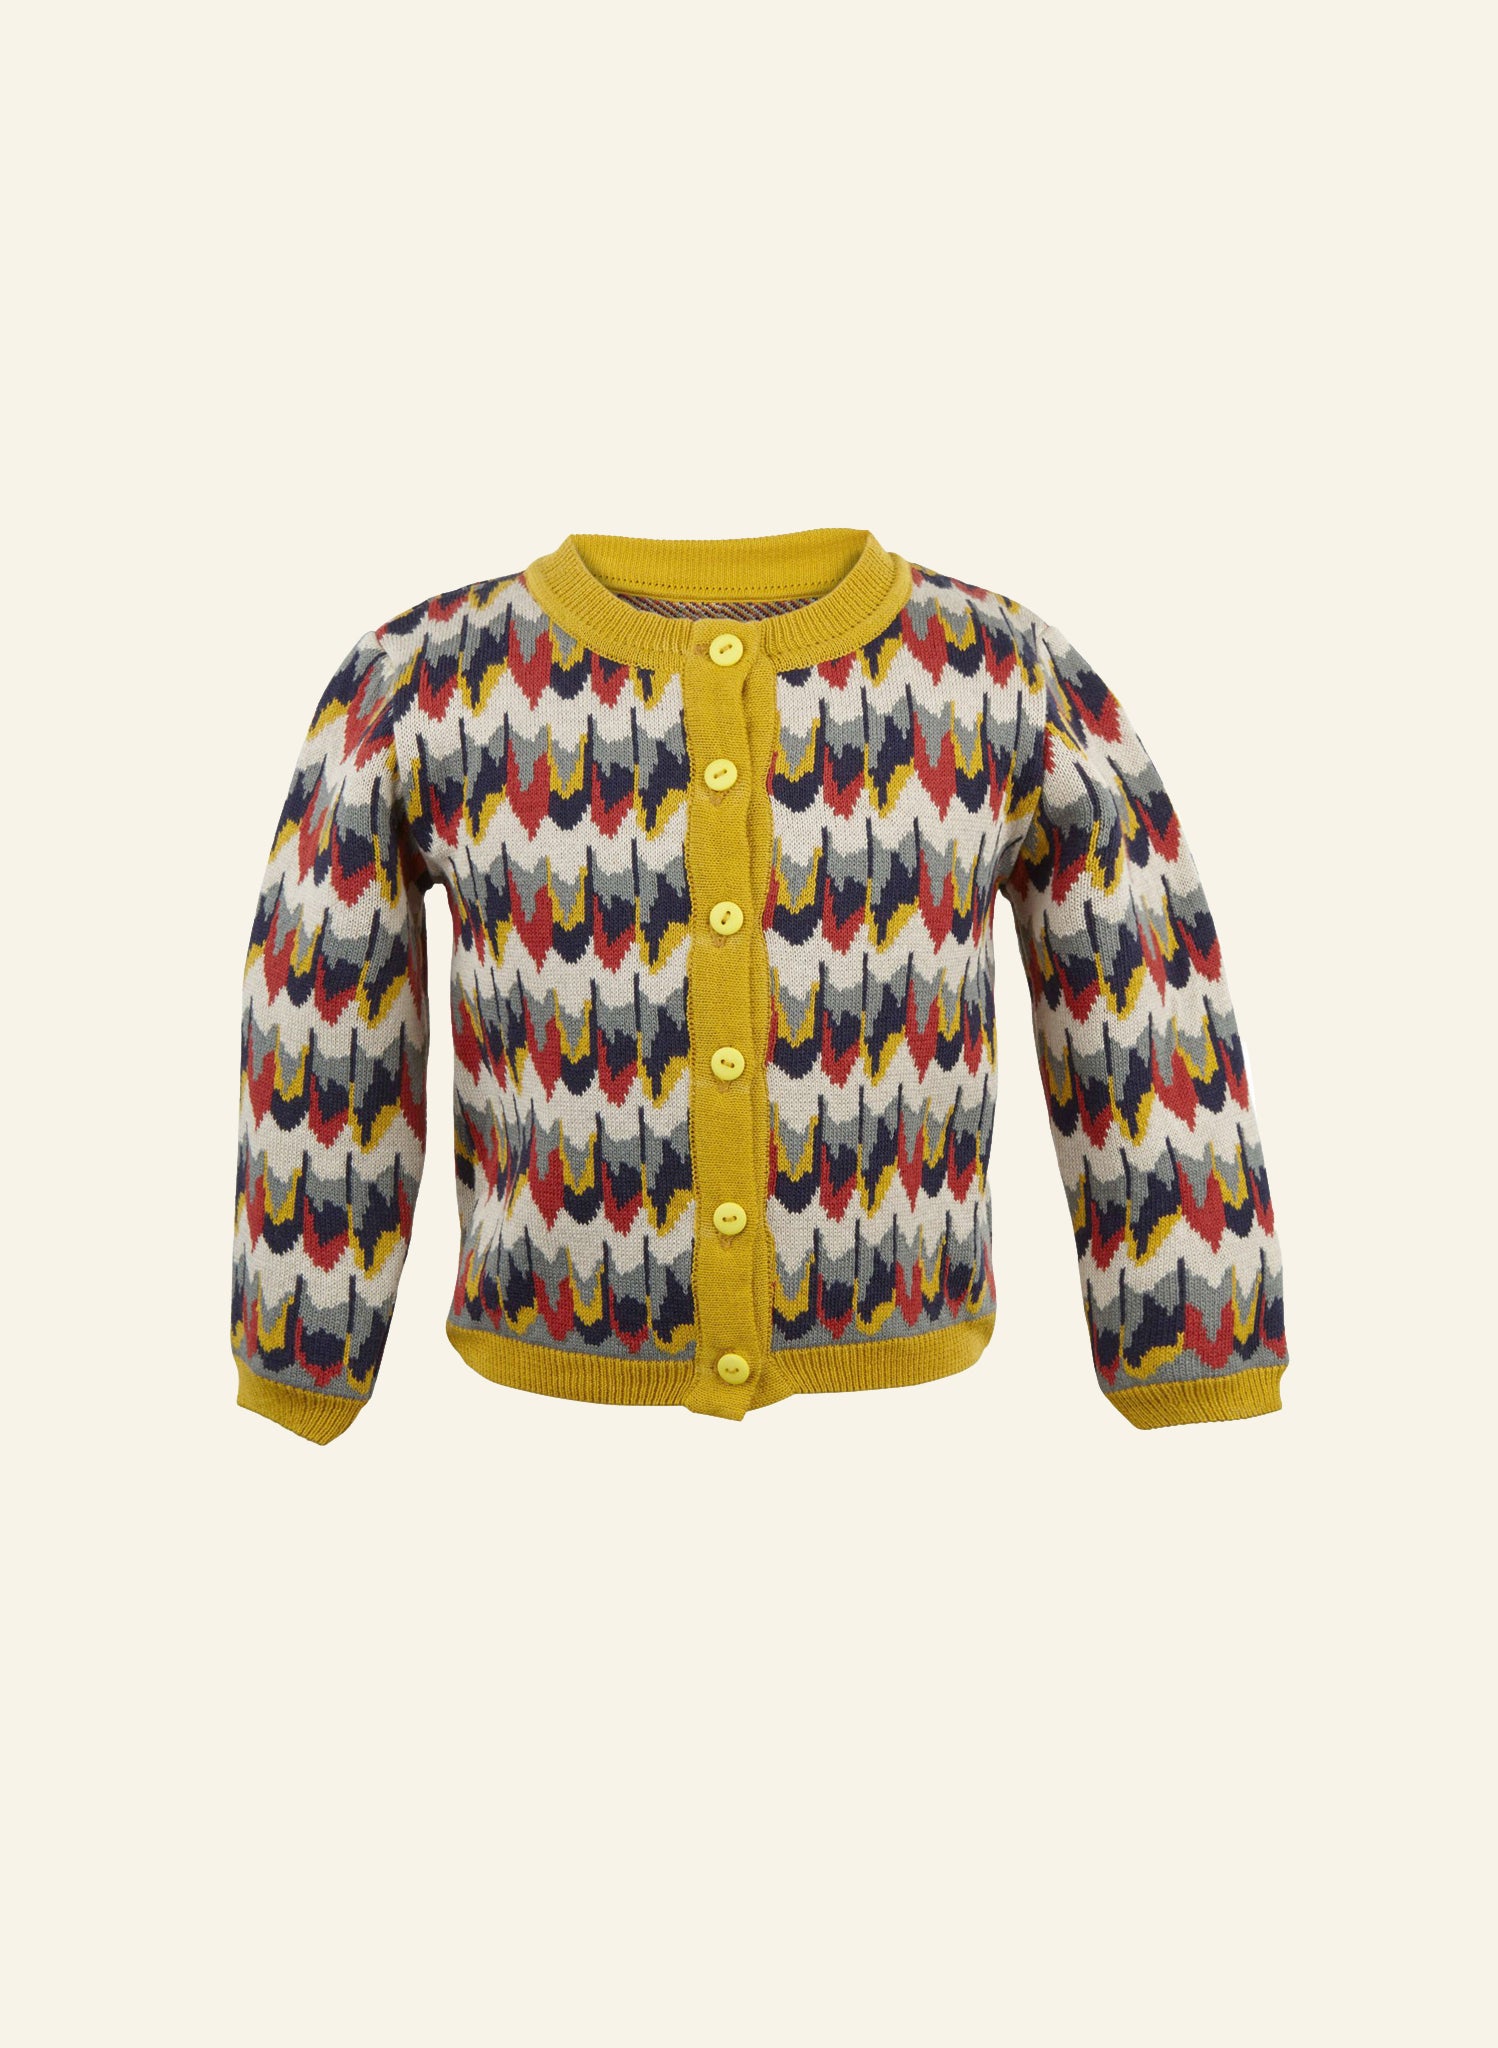 Children's Cardigan - Marbled Feathers